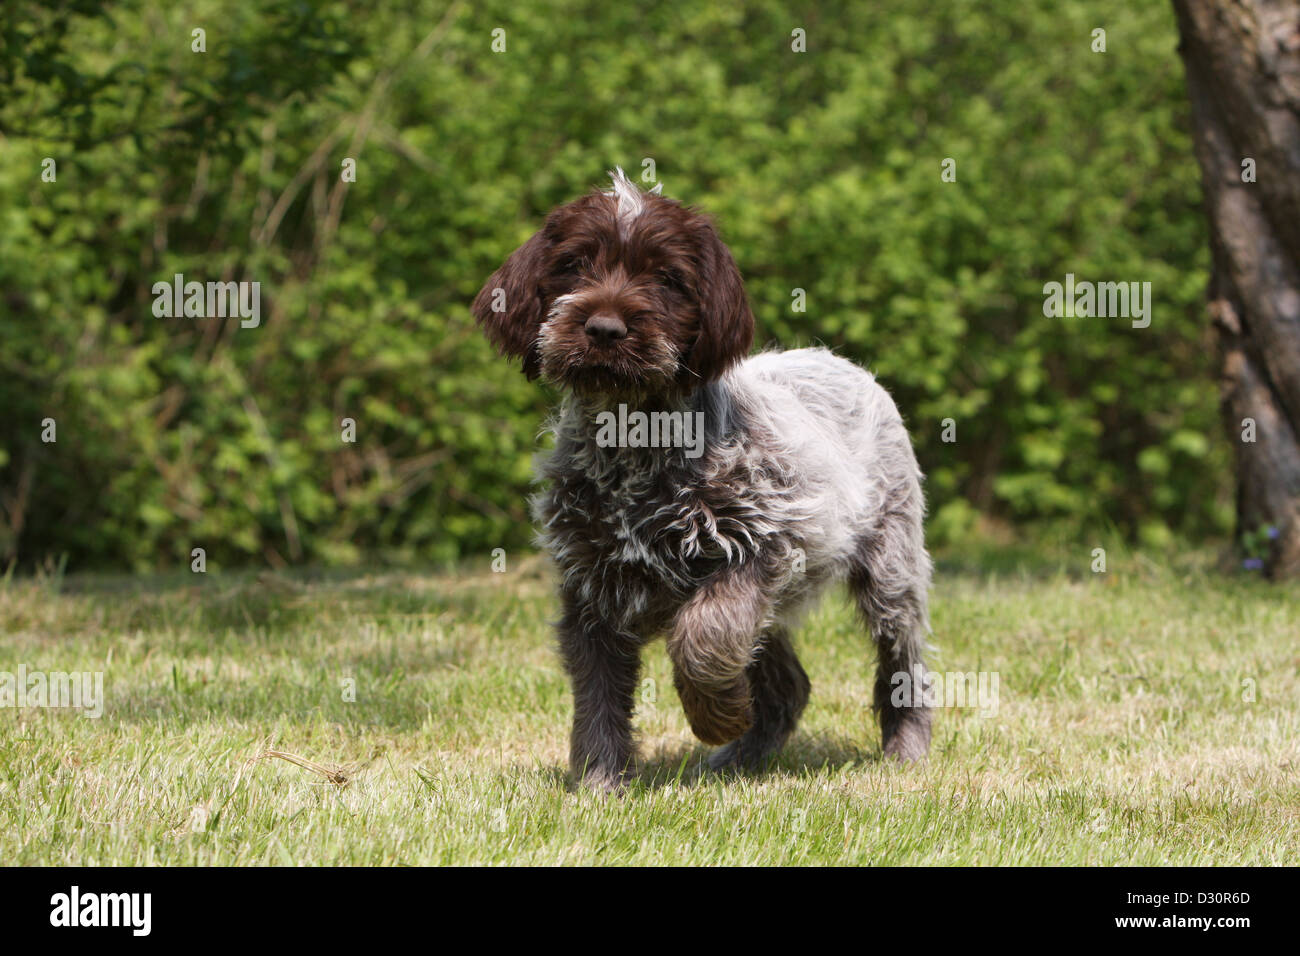 Dog Wirehaired Pointing Griffon / Korthals Griffon puppy standing paw  raised Stock Photo - Alamy